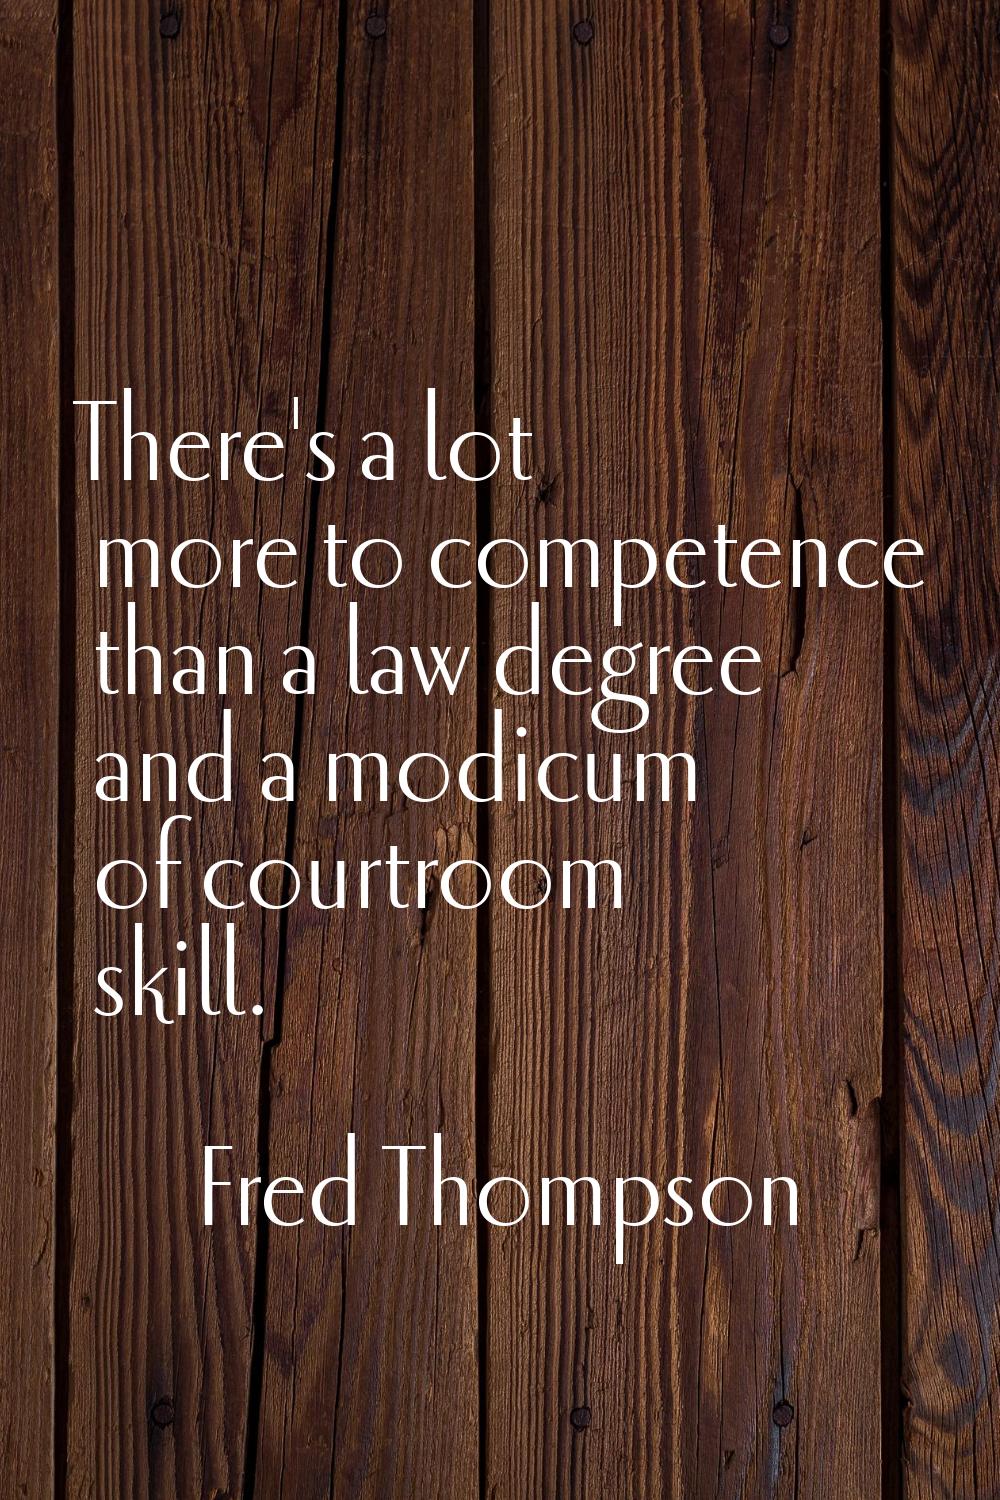 There's a lot more to competence than a law degree and a modicum of courtroom skill.